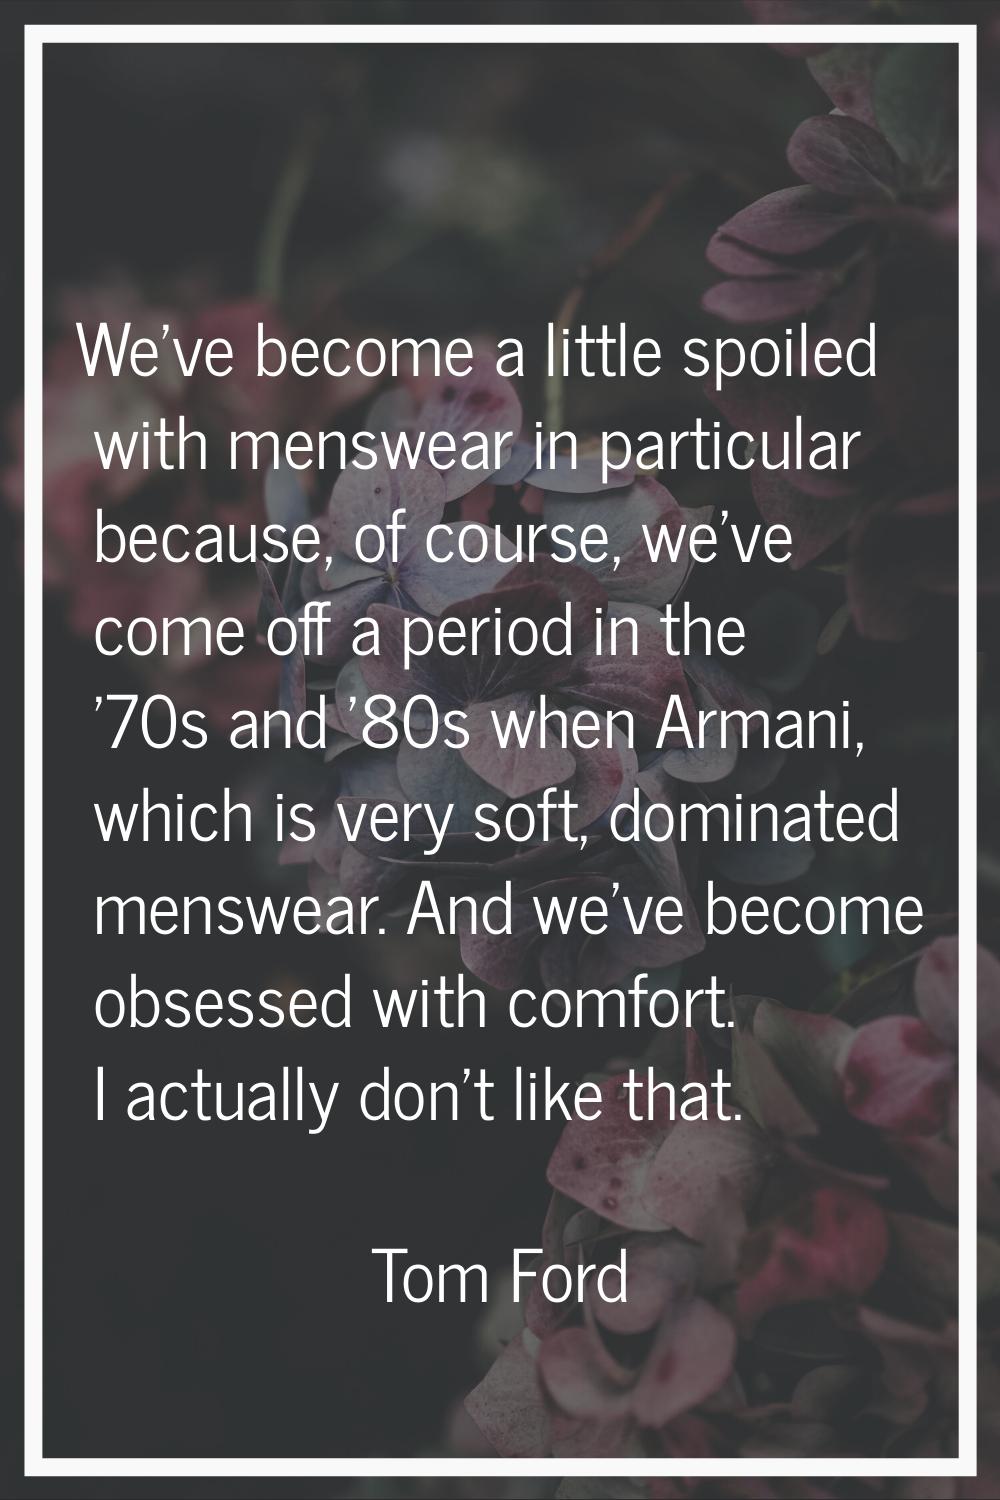 We've become a little spoiled with menswear in particular because, of course, we've come off a peri